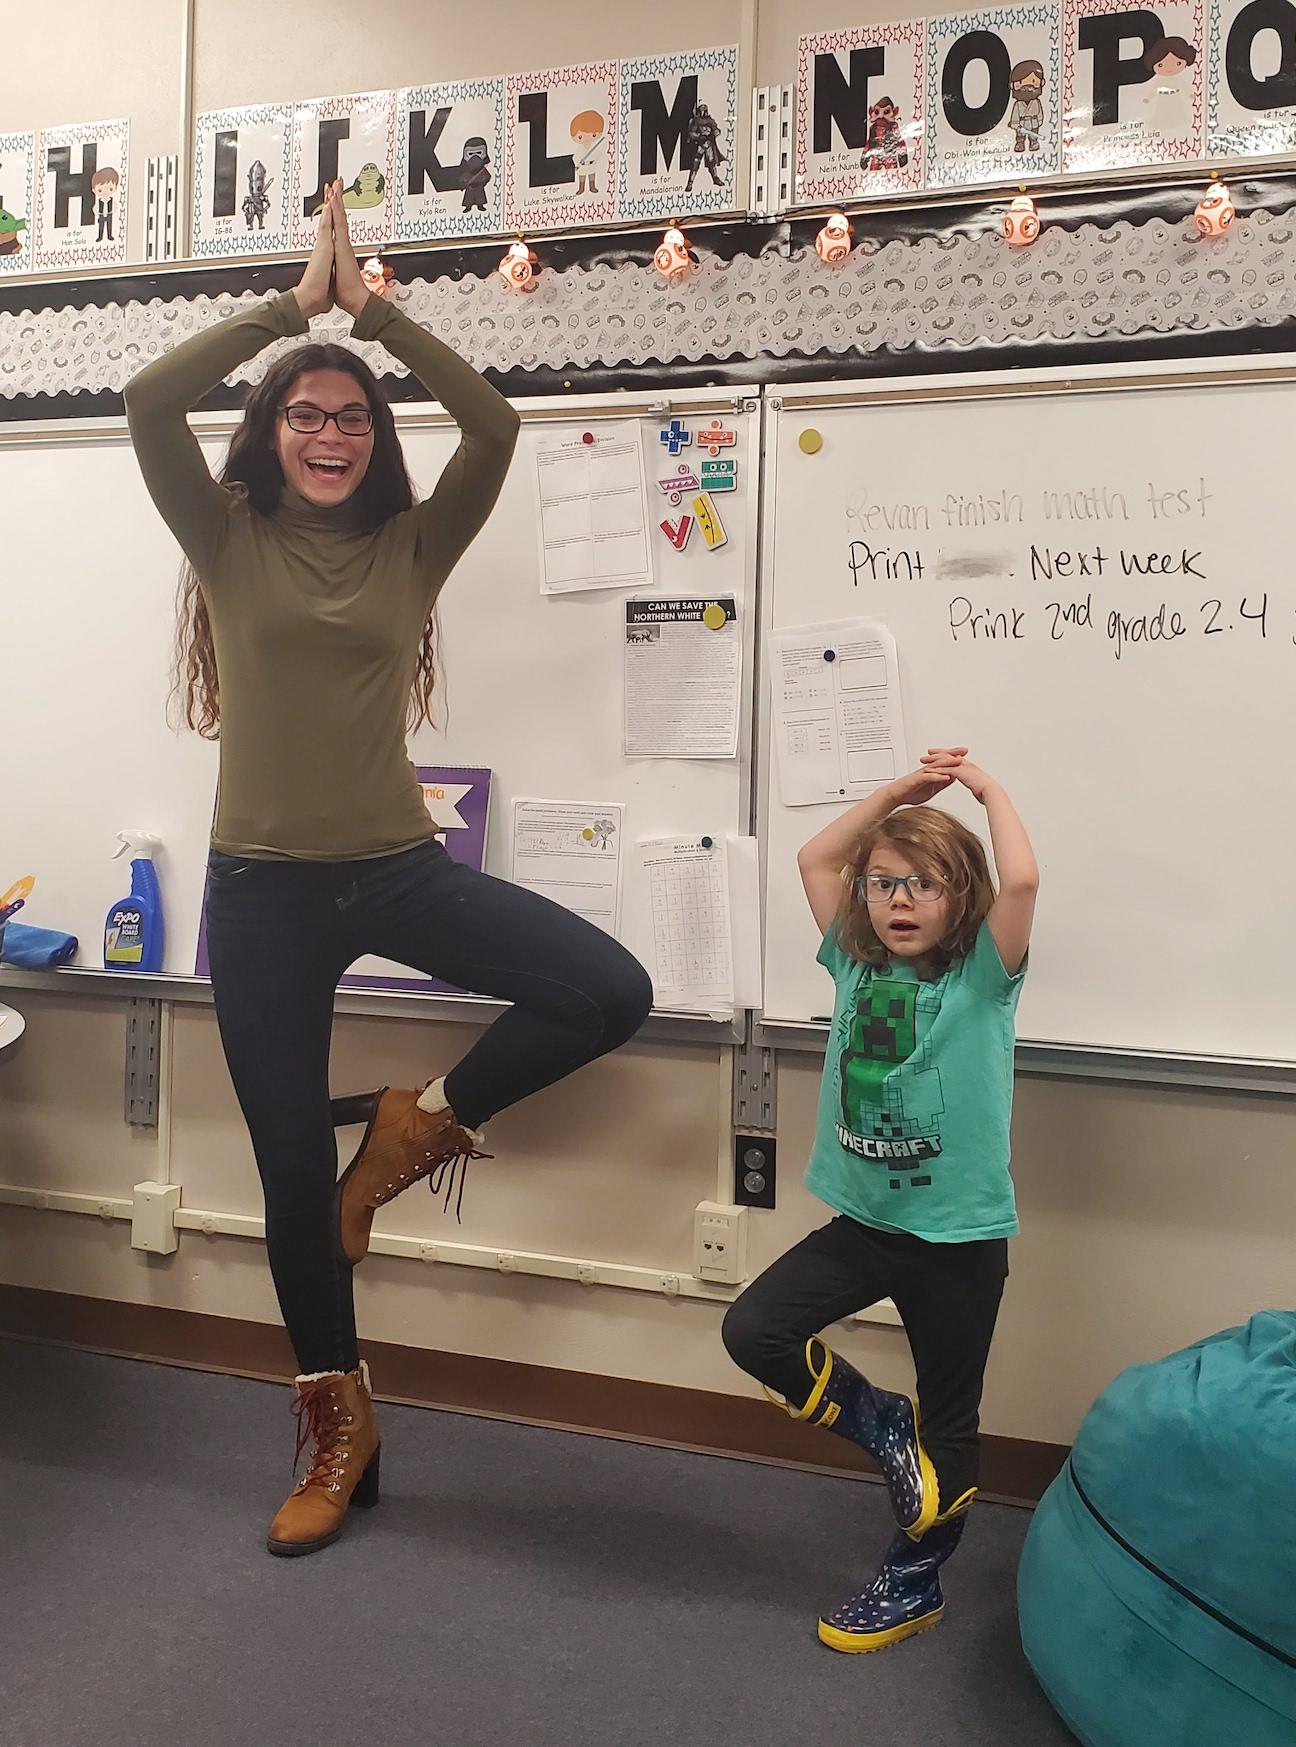 Ms. Kerestes and Kaylie Sabo practice yoga moves they learned in the book